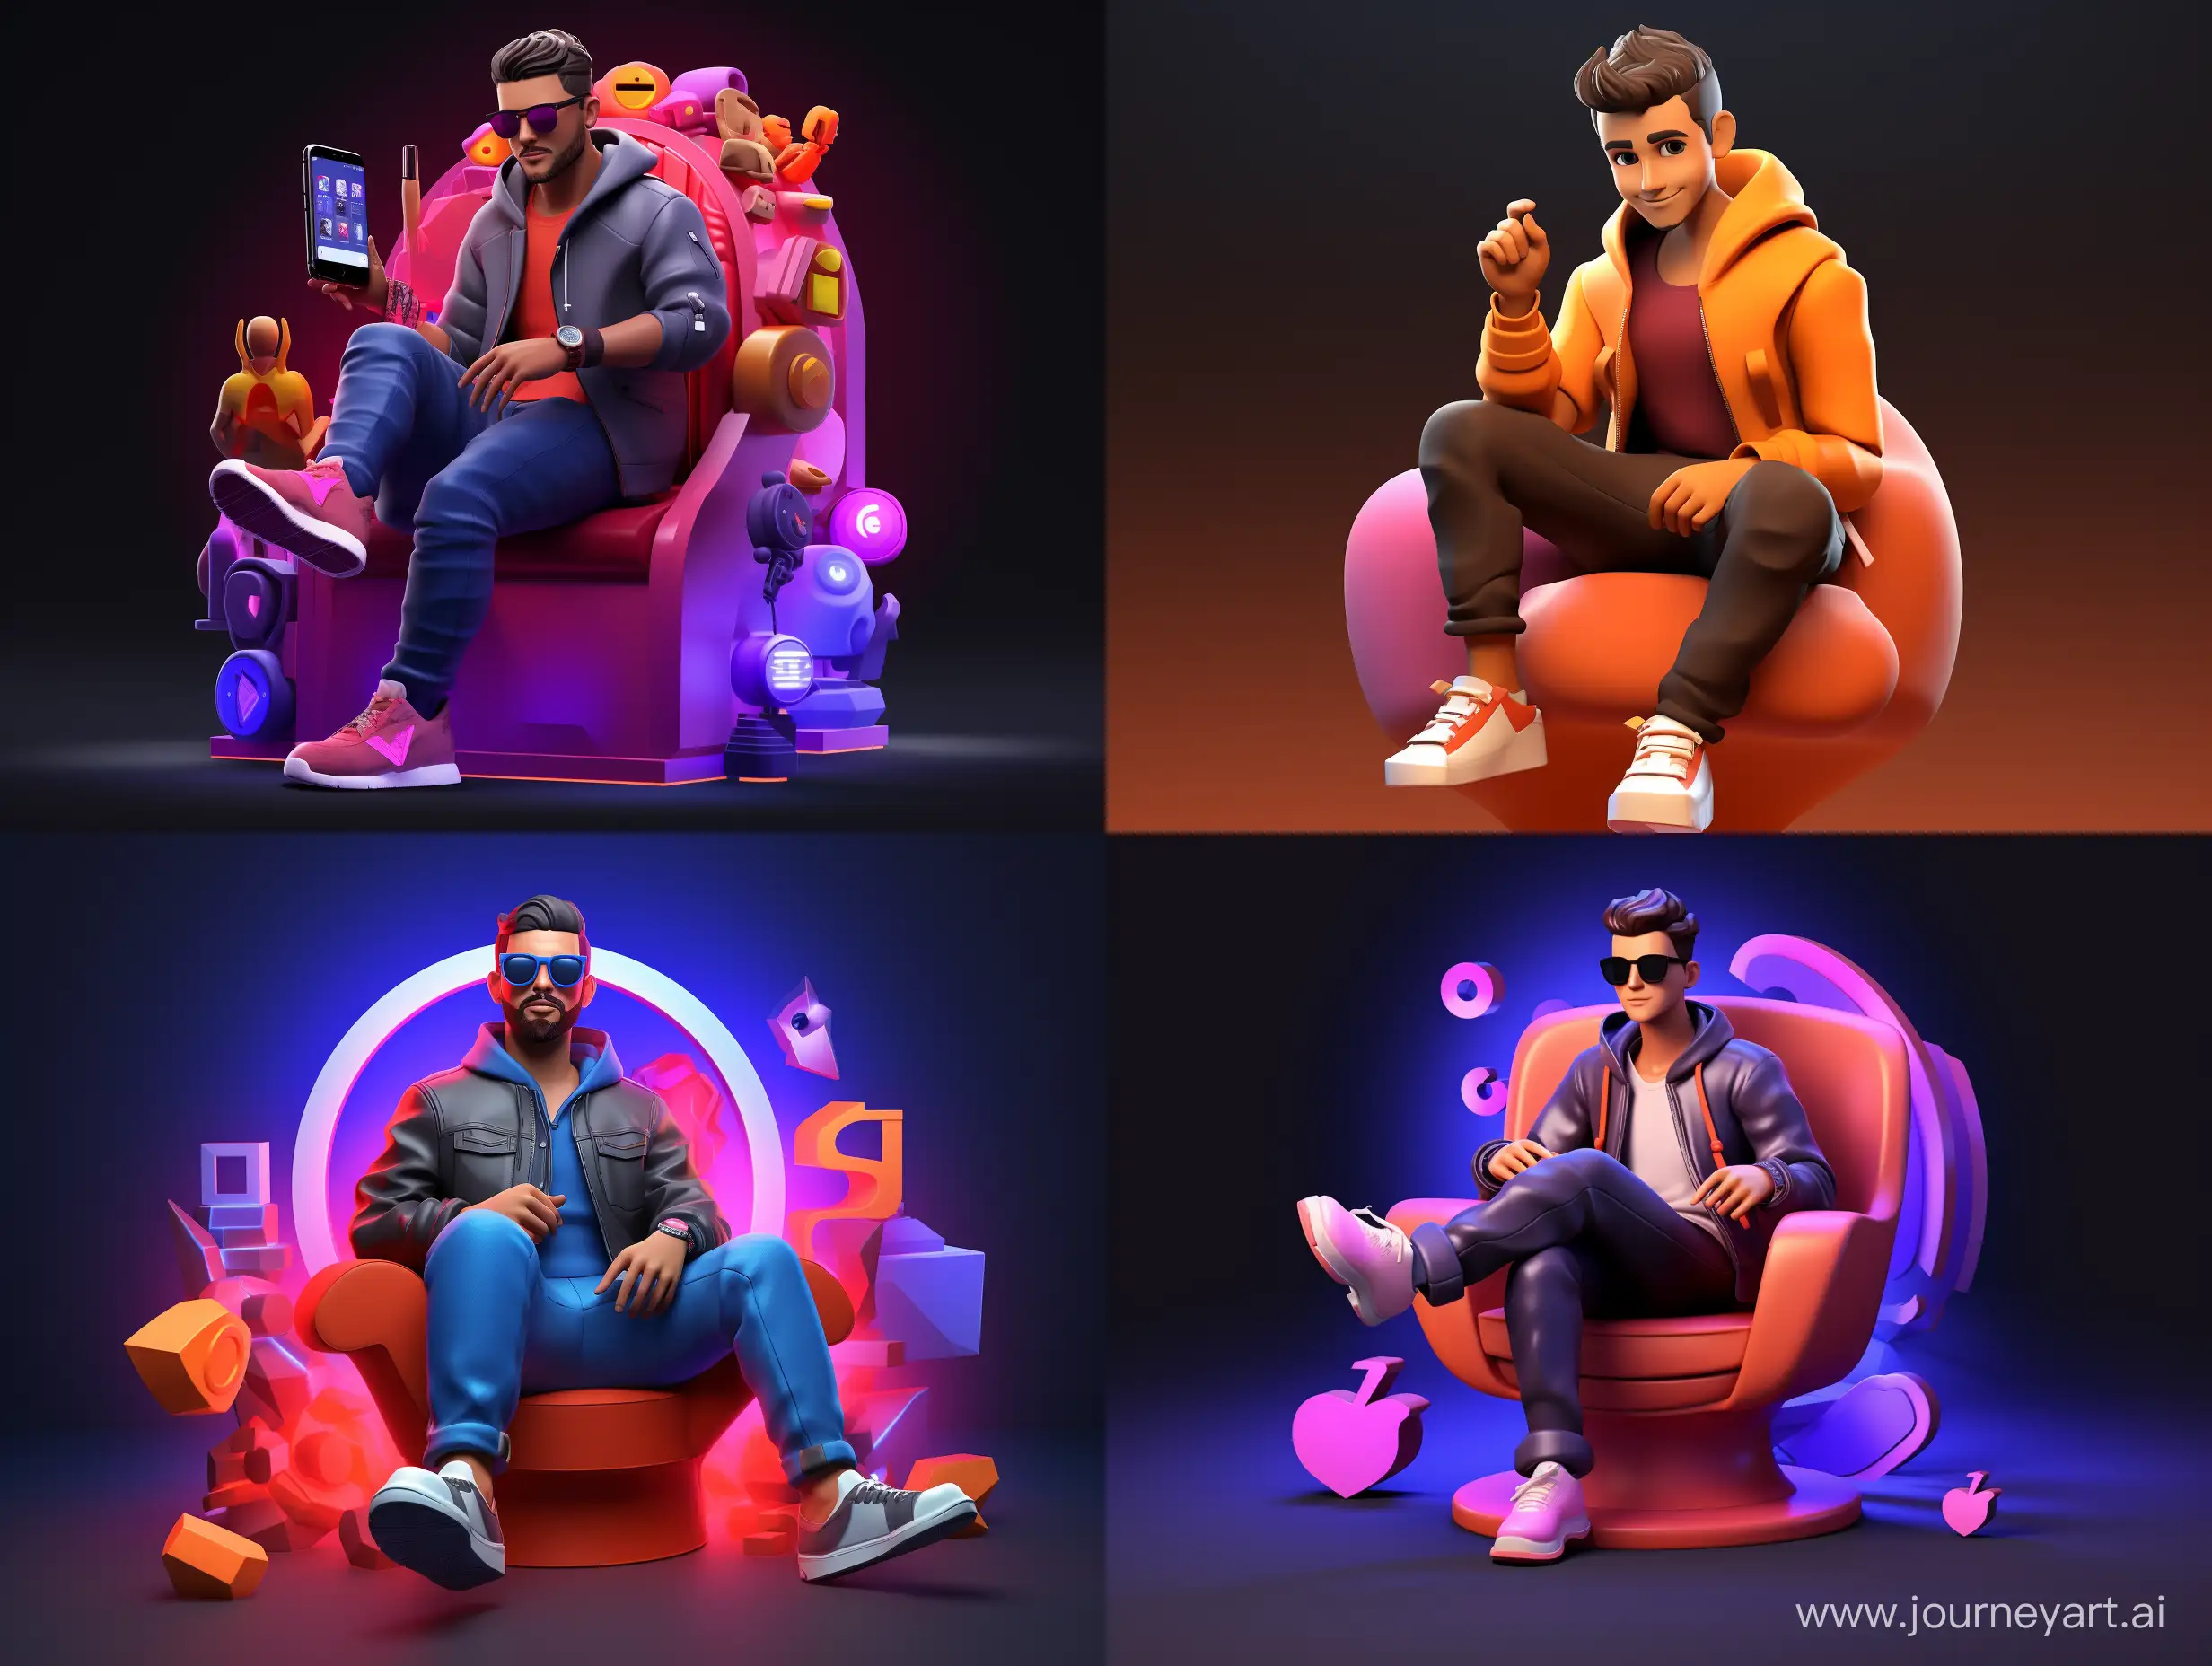 Trending 3D Social Media Image Prompt  Create a 3D illustration of an animated character sitting casually on top of a social media logo "instagram". The character must wear casual modern clothing such as jeans jacket and sneakers shoes. The background of the image is a social media profile page with a user name "bhawani_1_5" and a profile picture that match.
